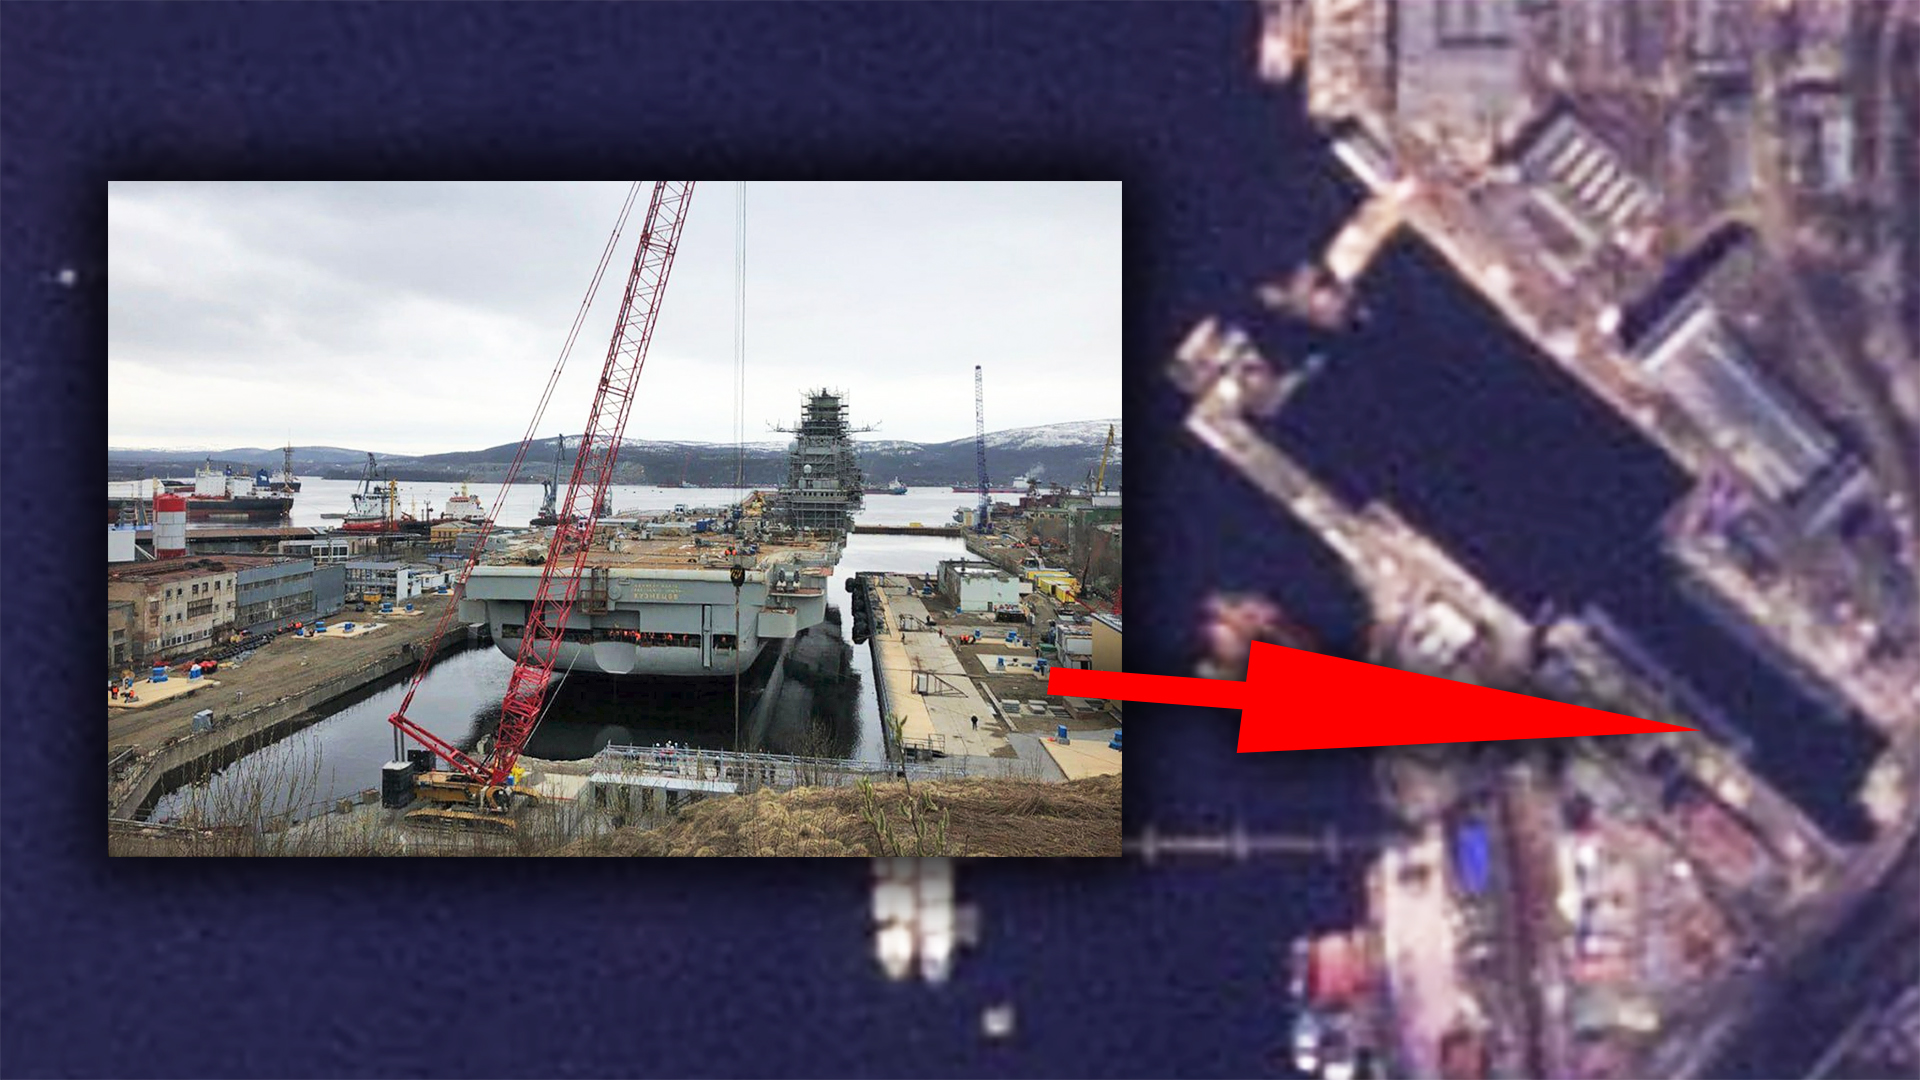 A picture showing the Russian aircraft carrier Admiral Kuznetsov inside a new drydock at the 35th Shipyard in Murmansk overlaid on a satellite image of the drydock.